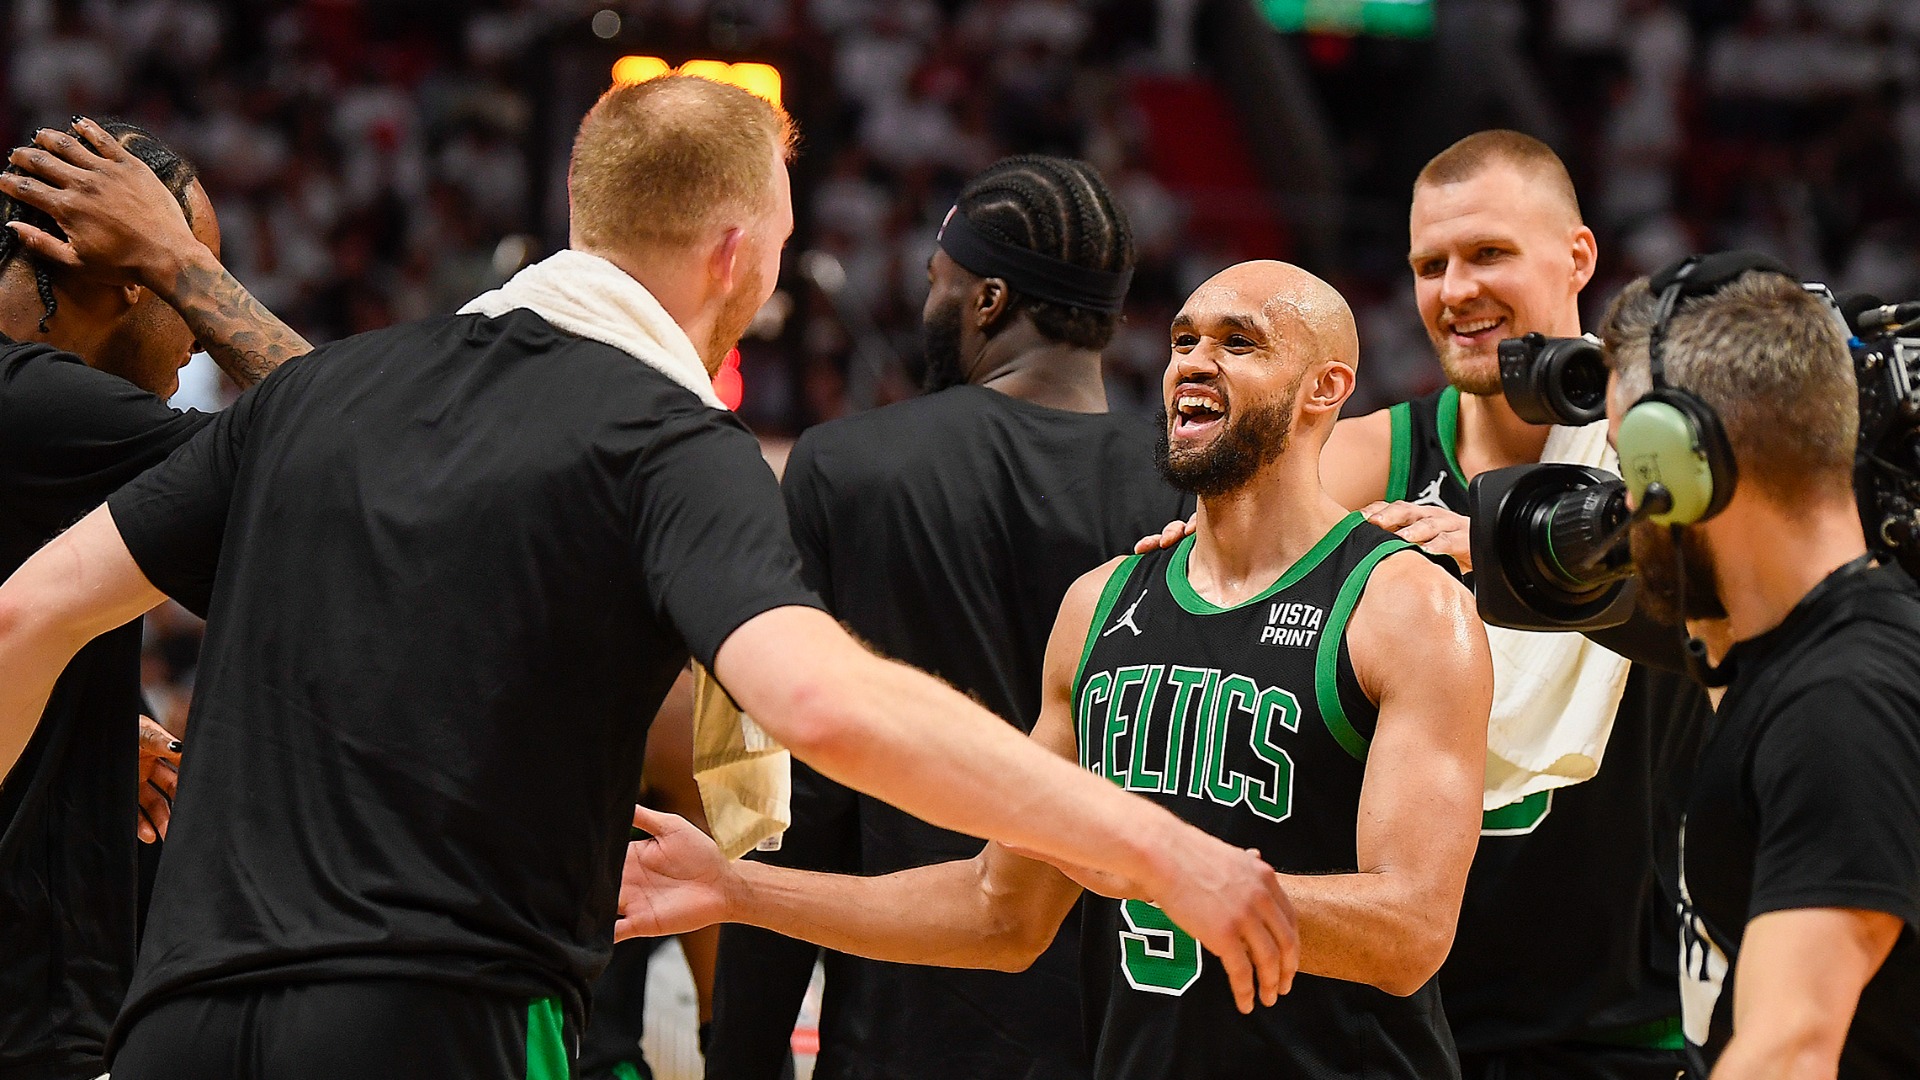 Charles Barkley Makes Series Prediction After Celtics-Cavaliers Game 1 [Video]